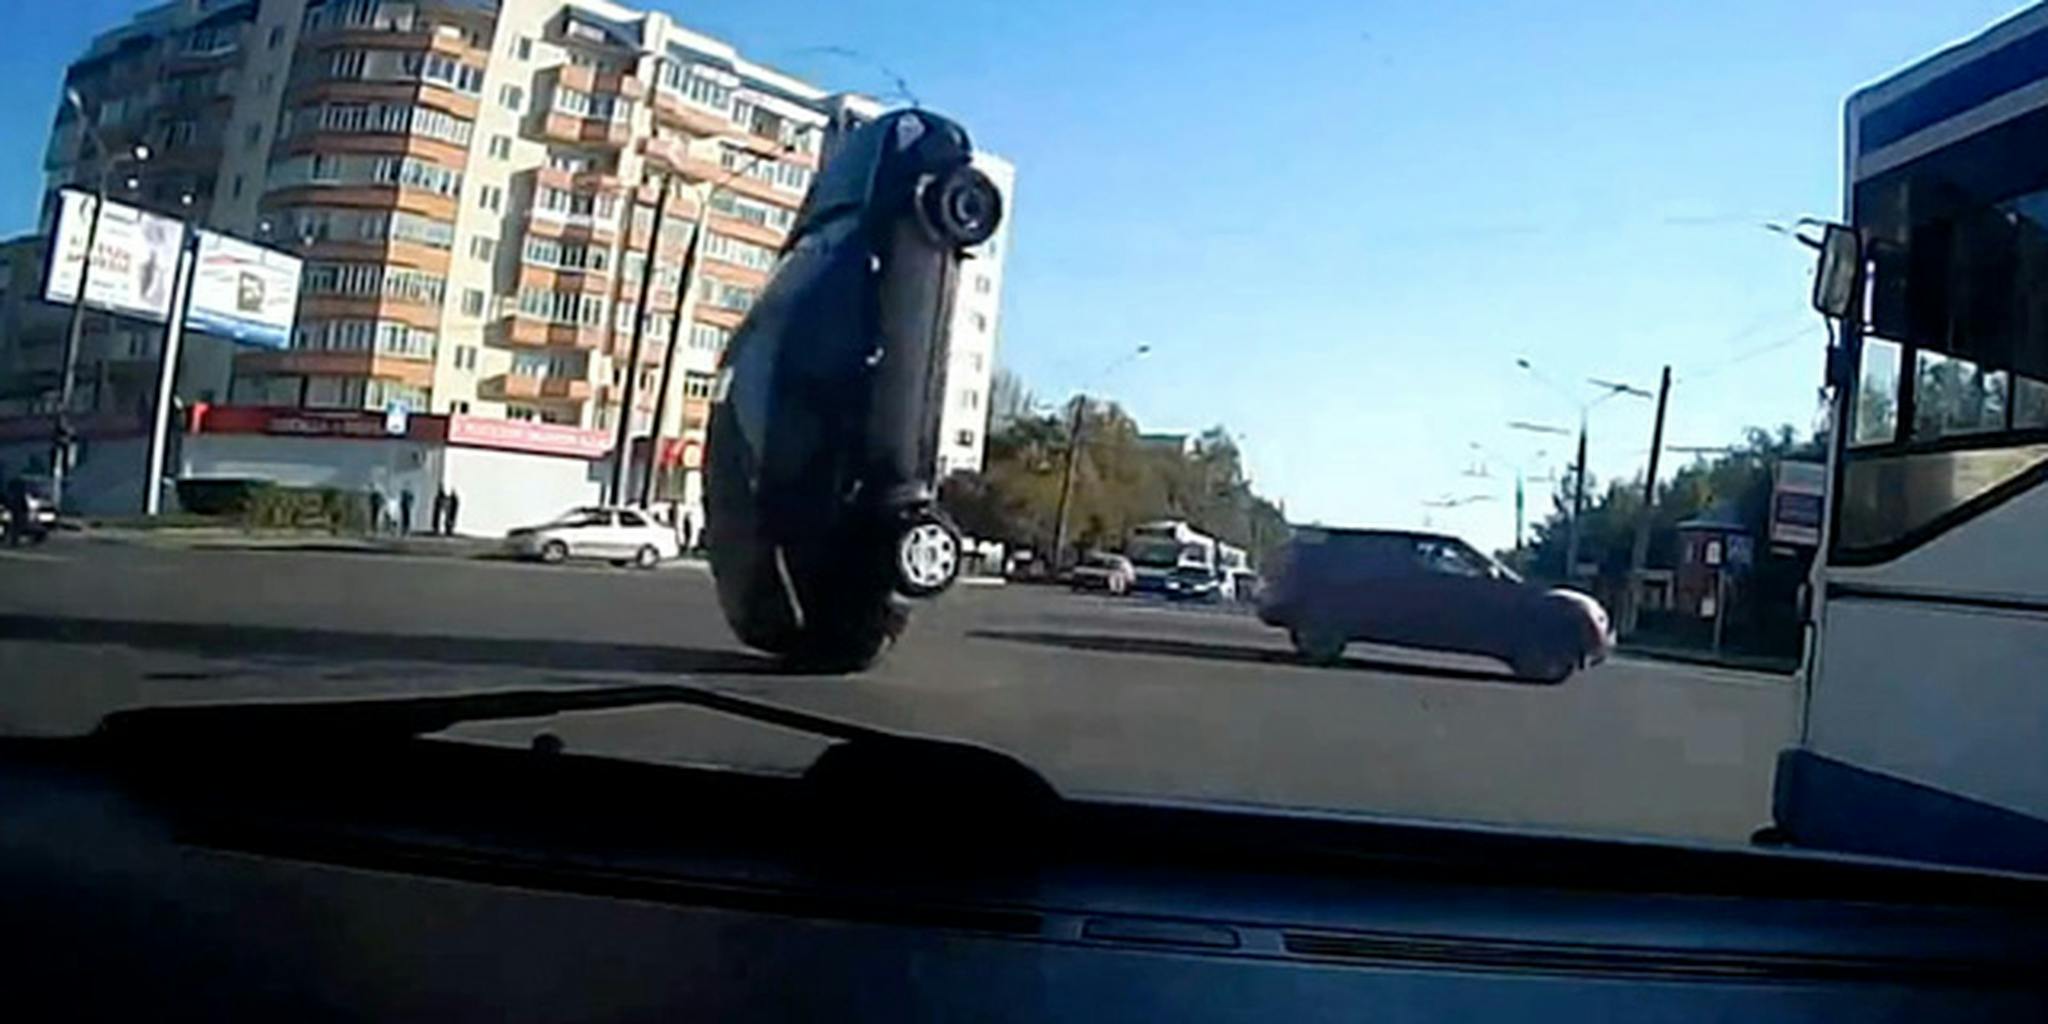 The fast, furious, and funny: Behind Russia's dash cam culture - The Daily  Dot